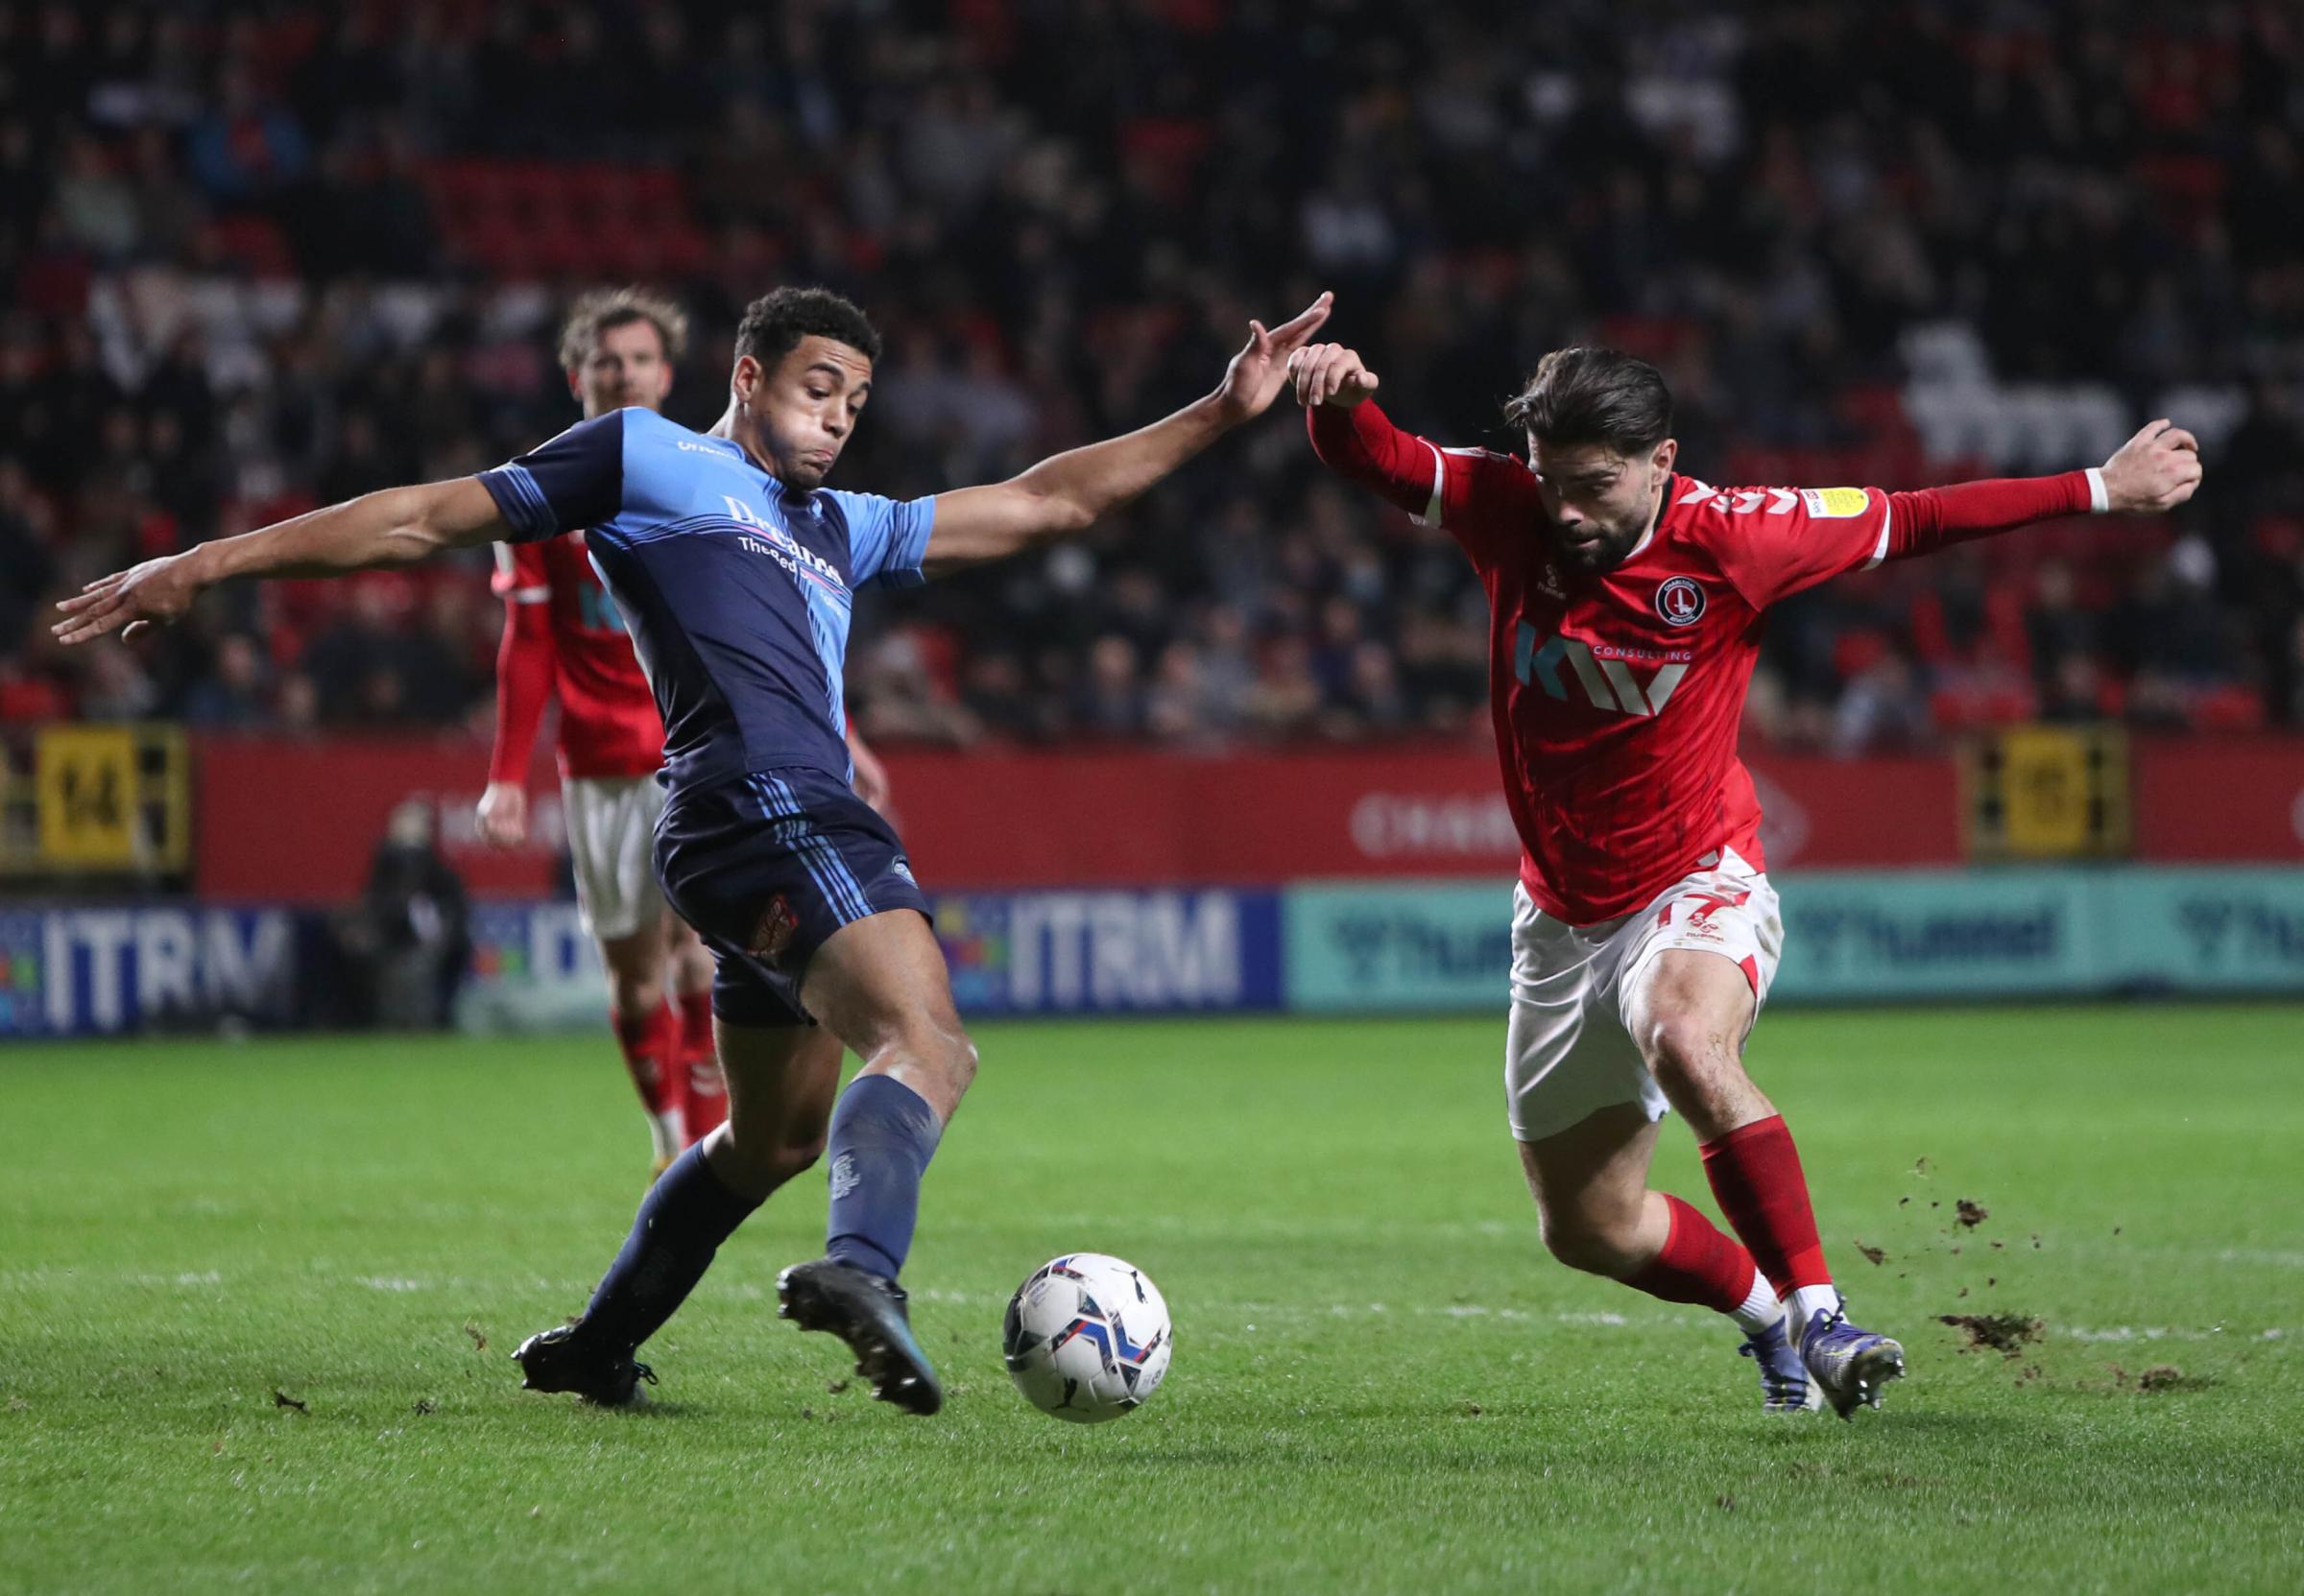 Chris Forino in action against Charlton Athletic on Januray 1, 2022. Wanderers won 1-0 which was their first-ever win in the league at the Valley (PA)